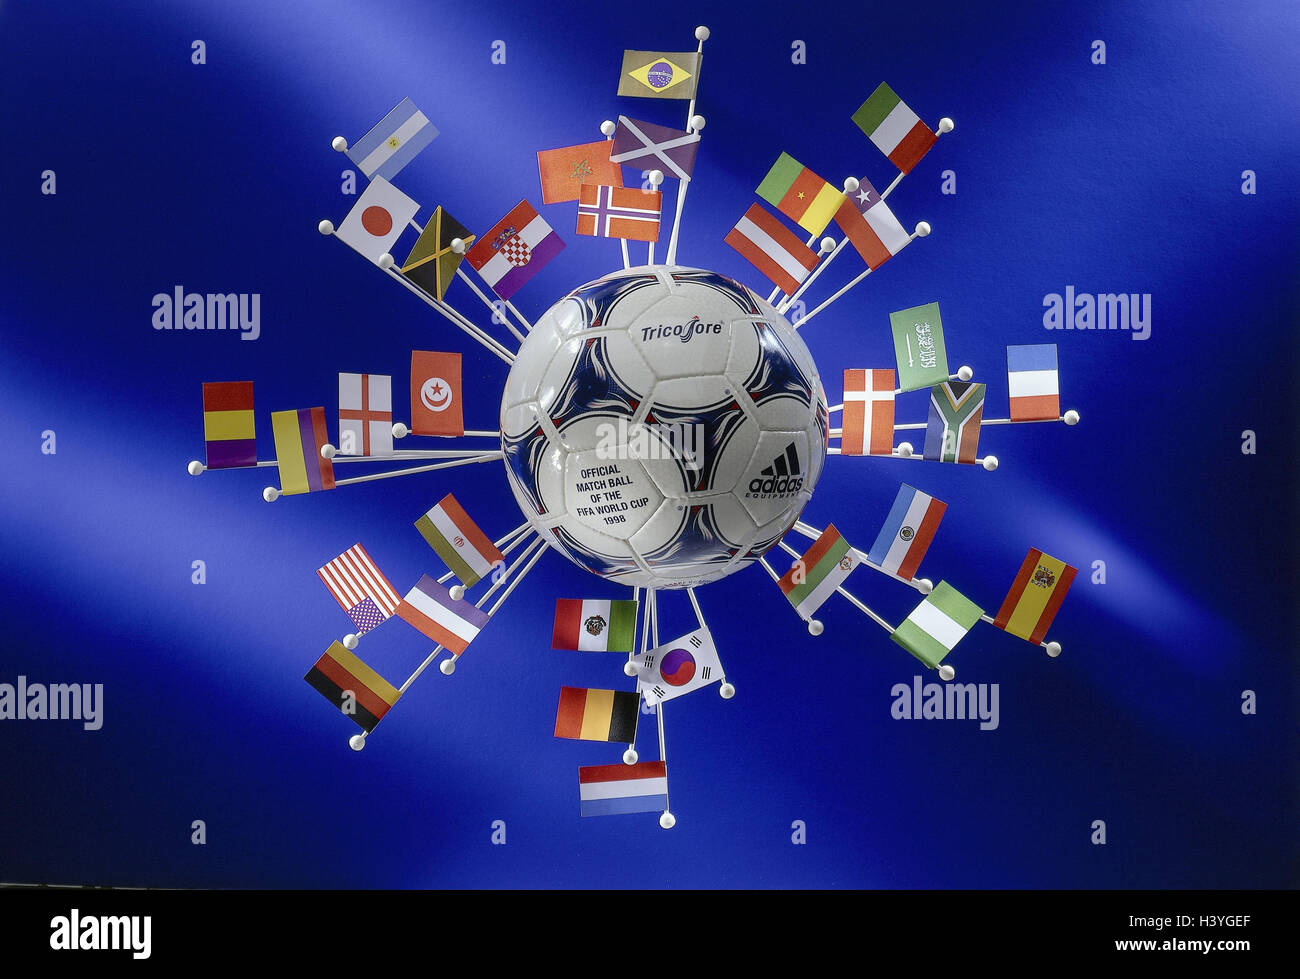 Football, flags, internationally, no property release, Still life, product photography, ball, icon, sport, sport, worldwide, world championship, world championship, Football World Cup, in 1998, flags, pendants, football nations, nations, countries, partic Stock Photo